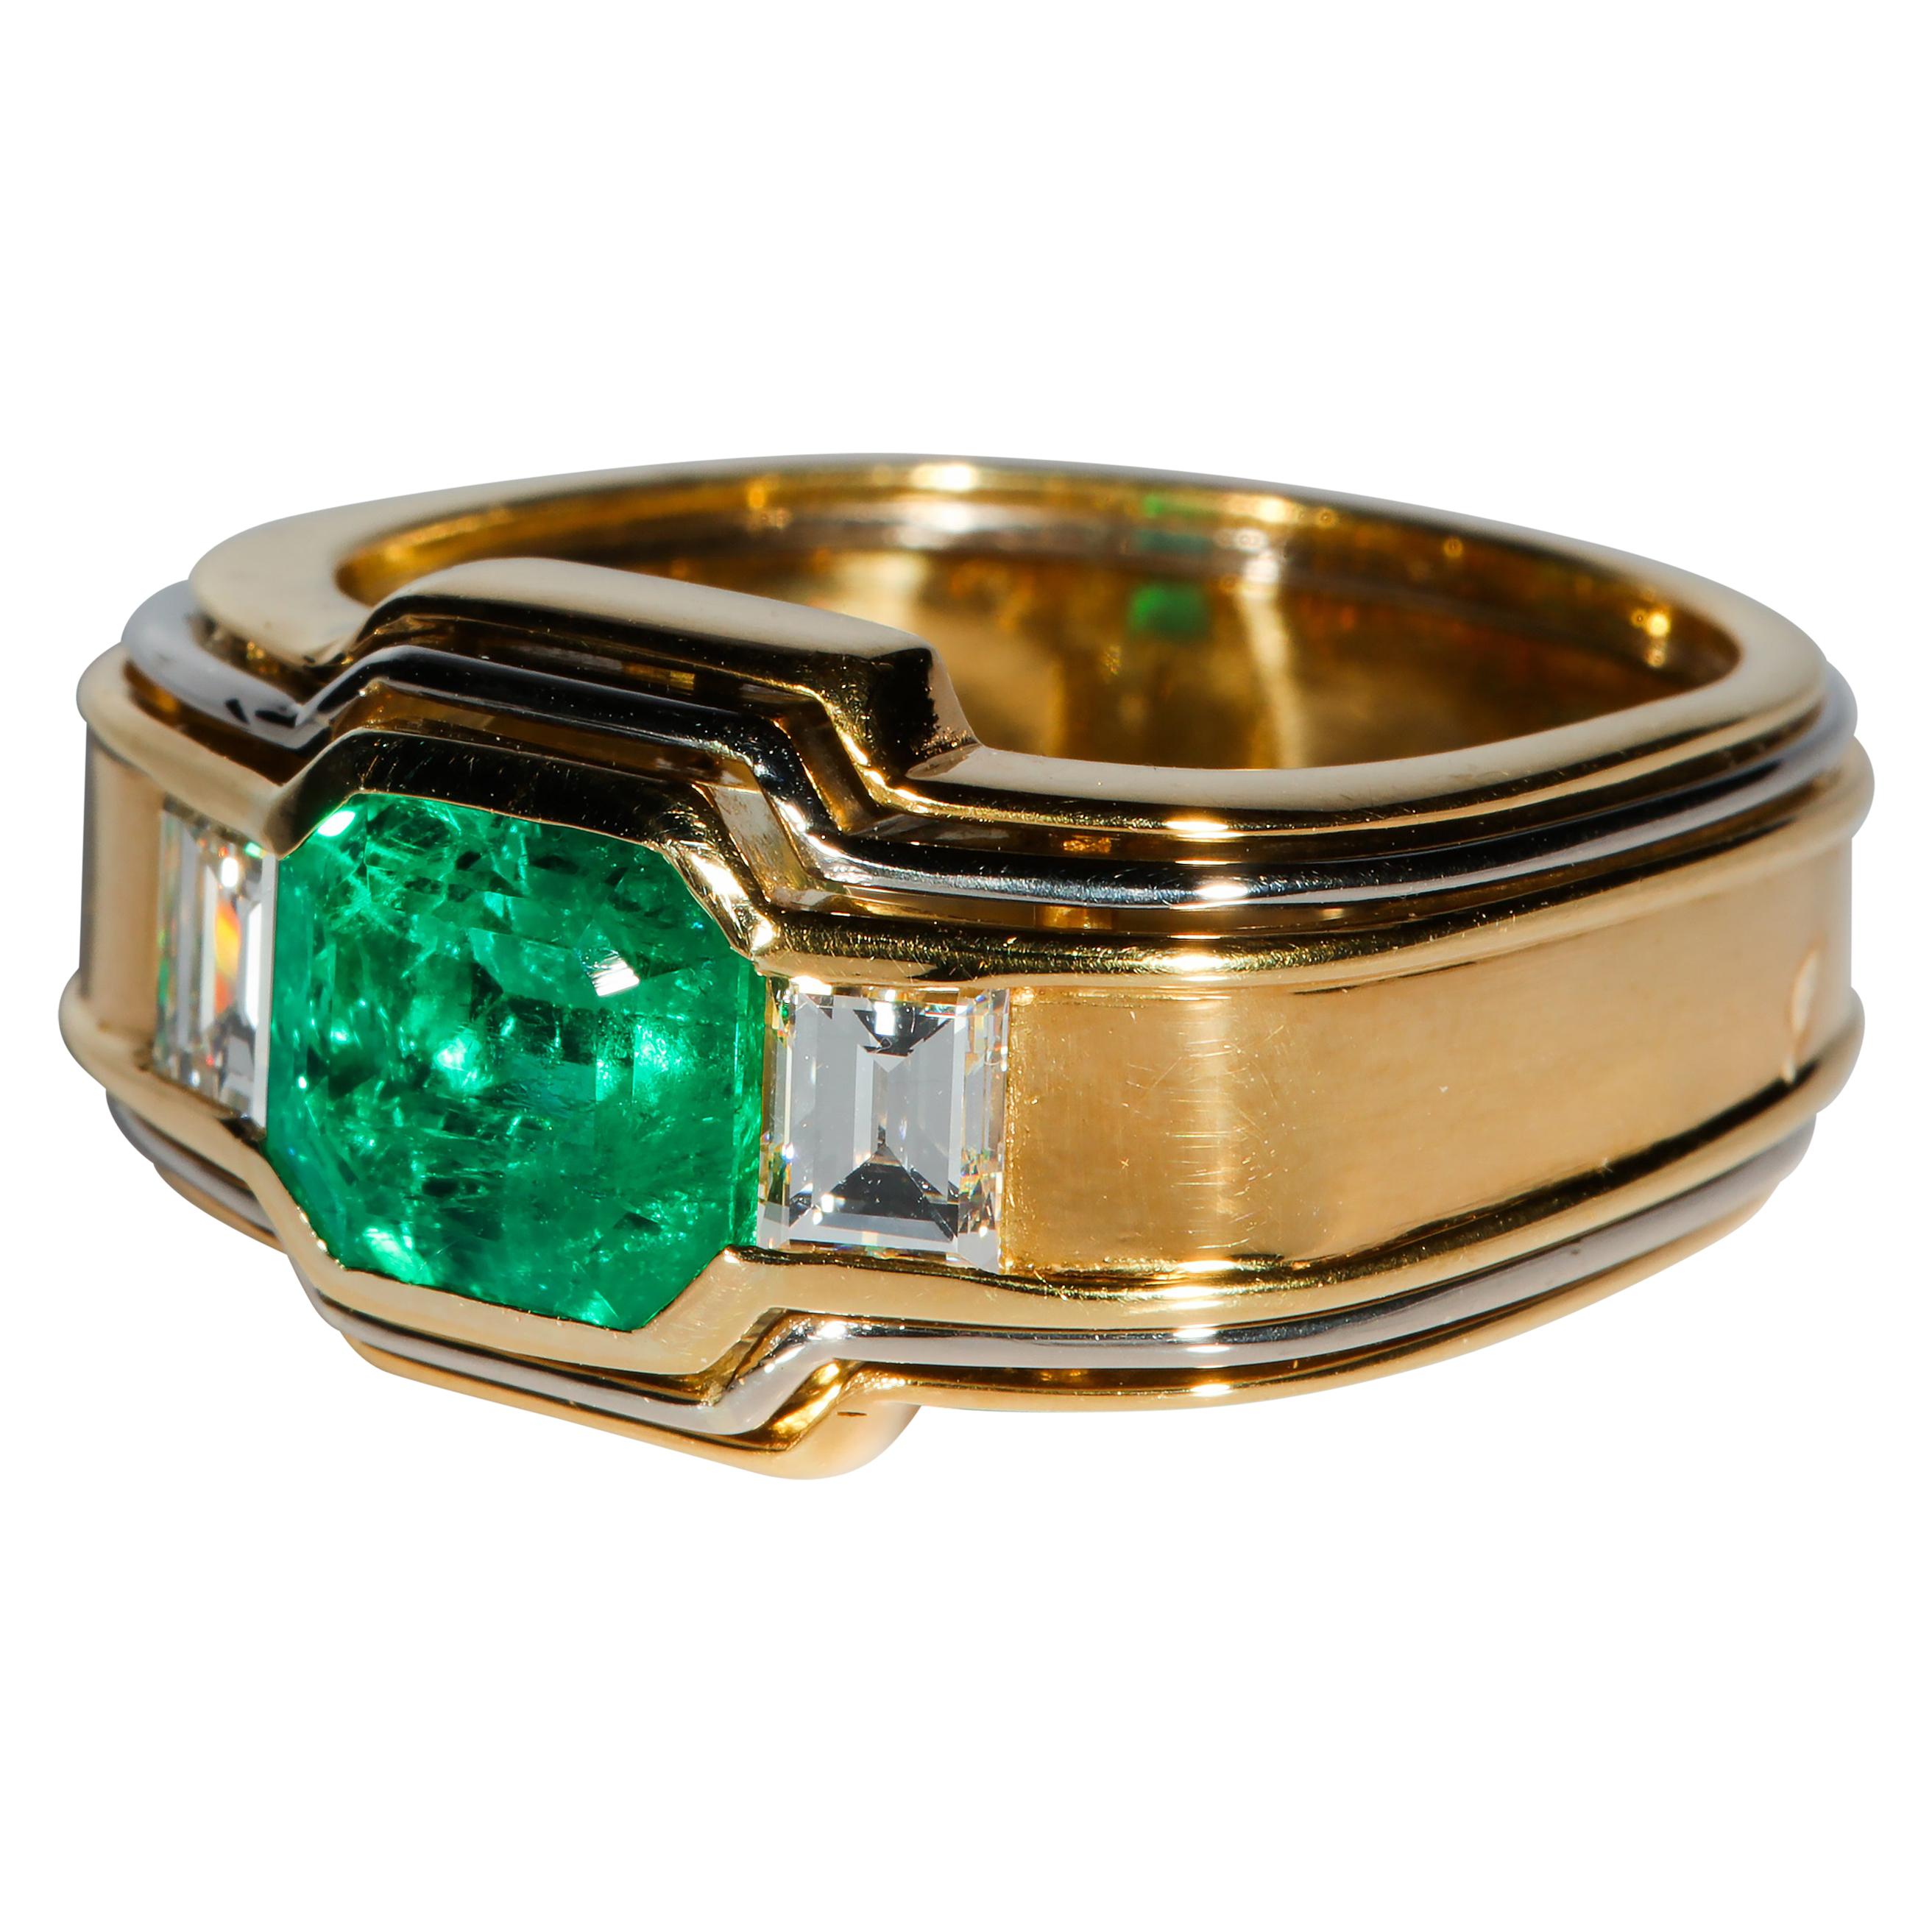 Men's 2.5 Carat Certified Colombian Emerald Ring in Gold With Diamonds